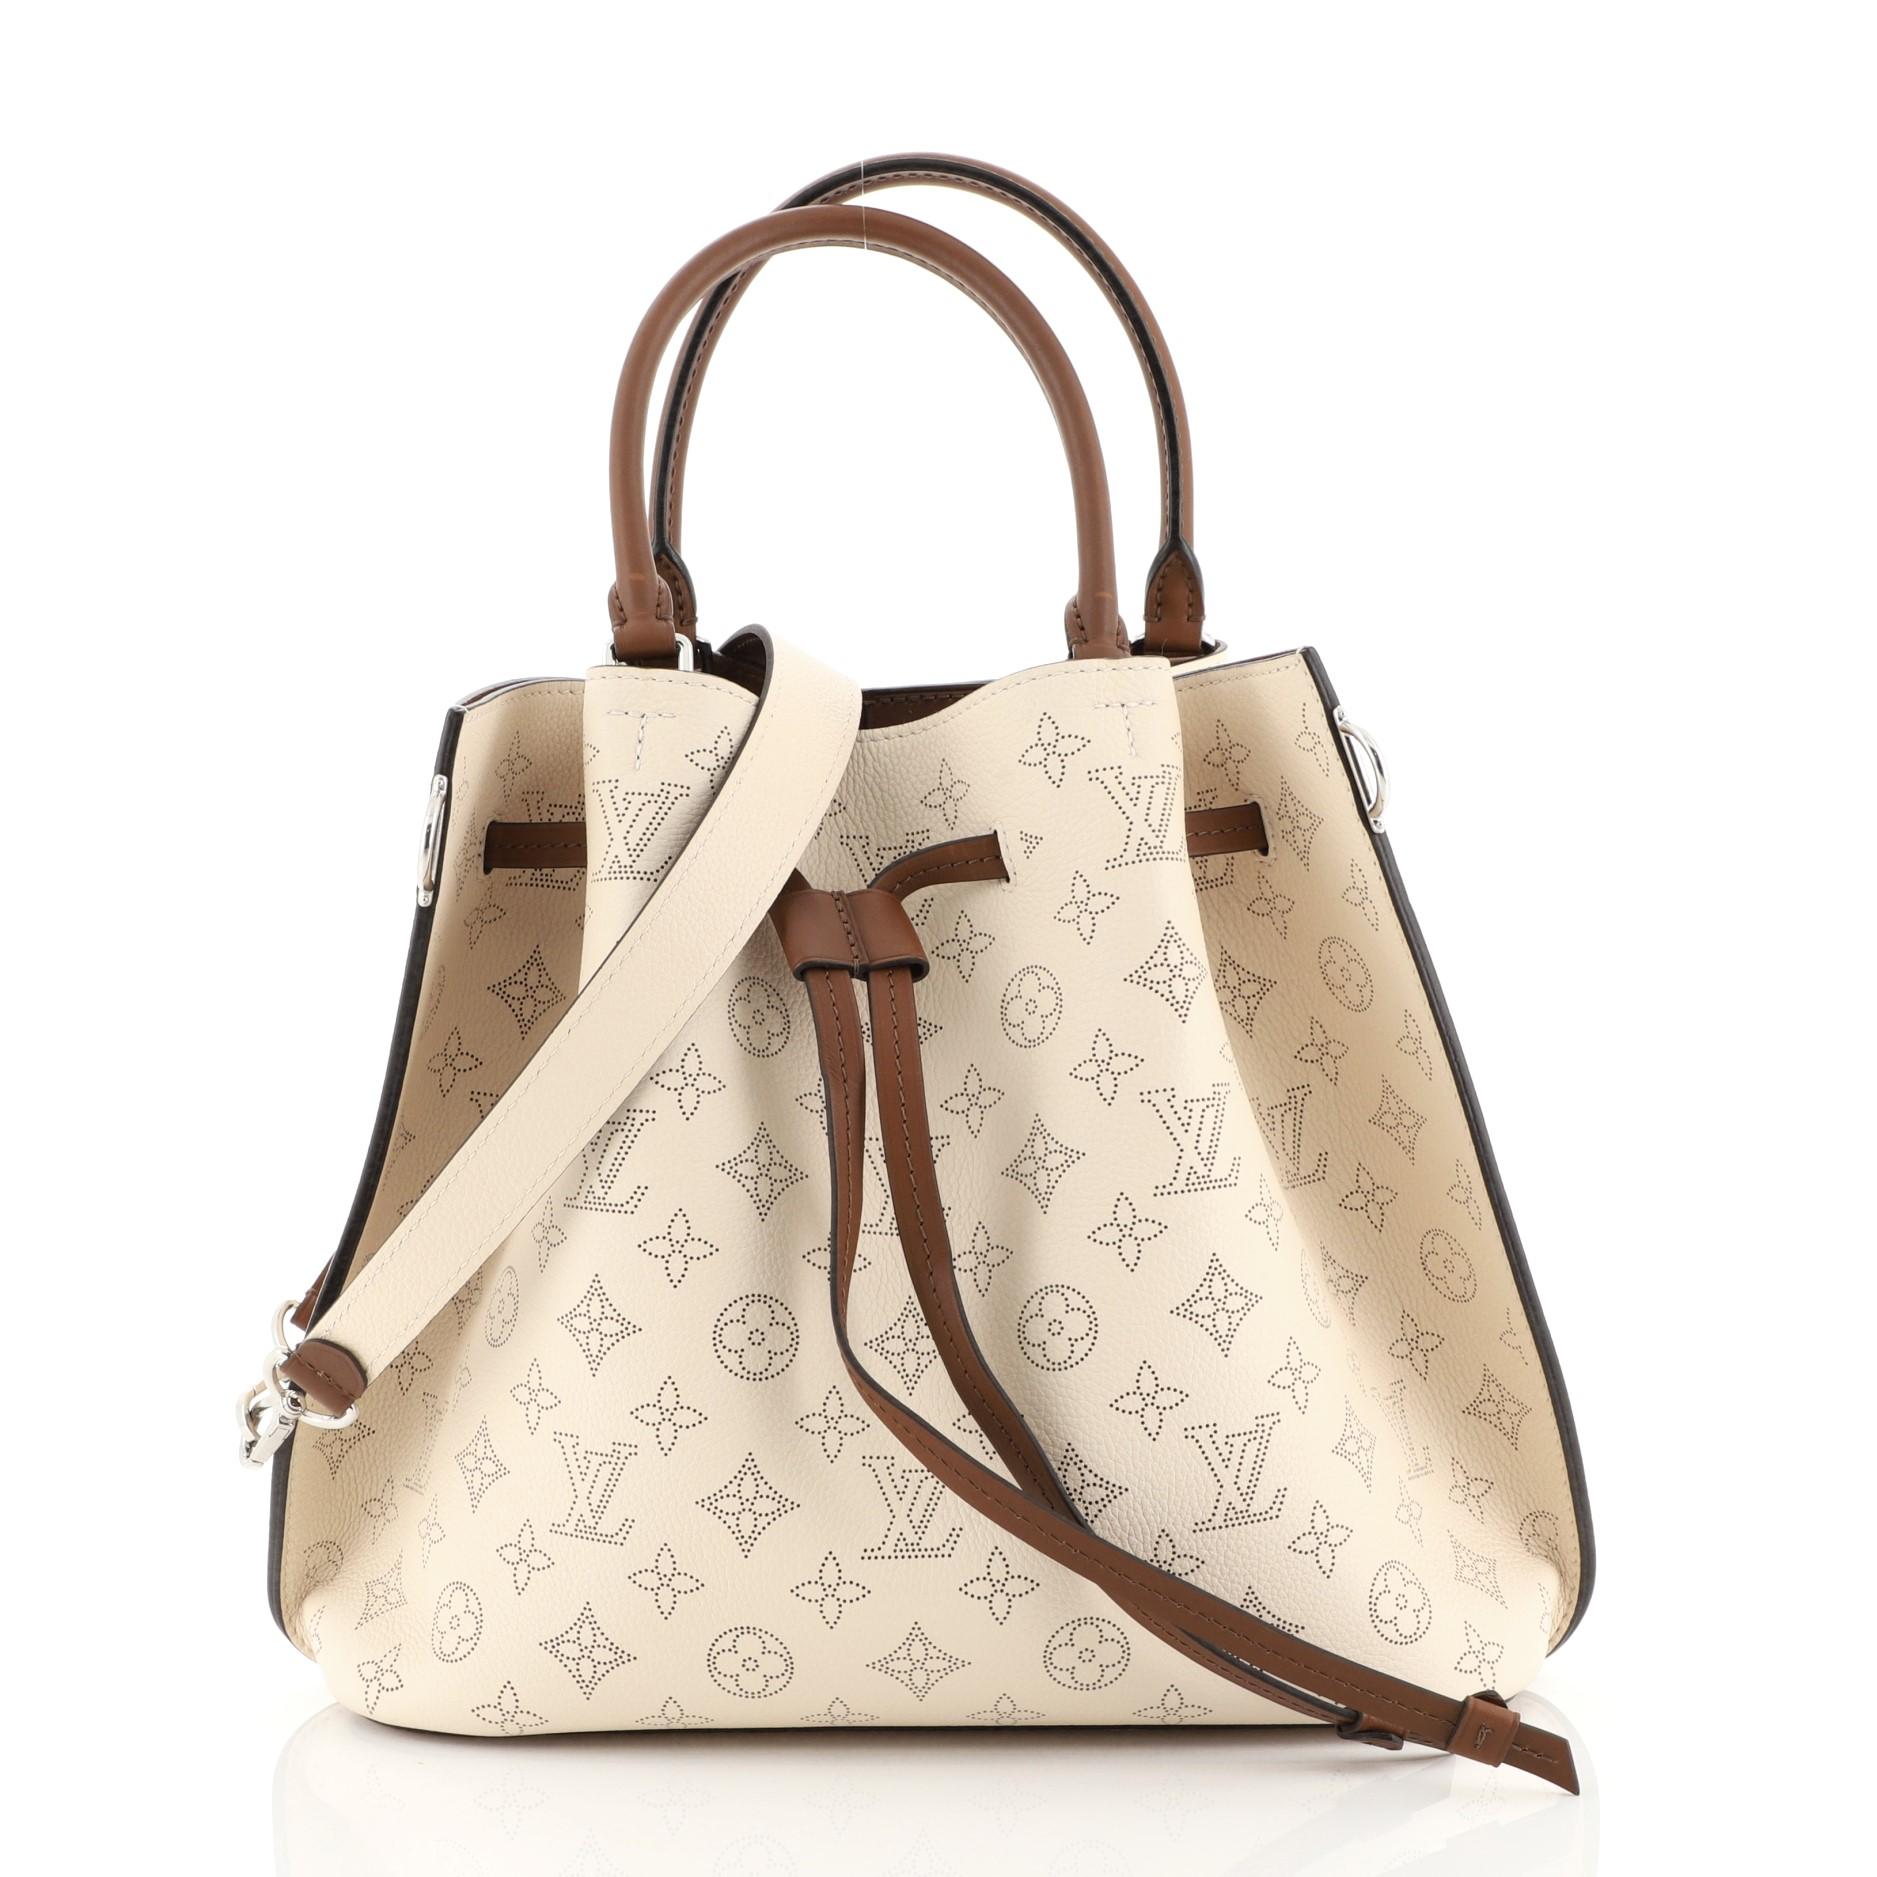 This Louis Vuitton Girolata Handbag Mahina Leather, crafted in neutral monogram mahina leather, features dual rolled leather handles, protective base studs, and silver-tone hardware. Its drawstring leather closure opens to a brown microfiber